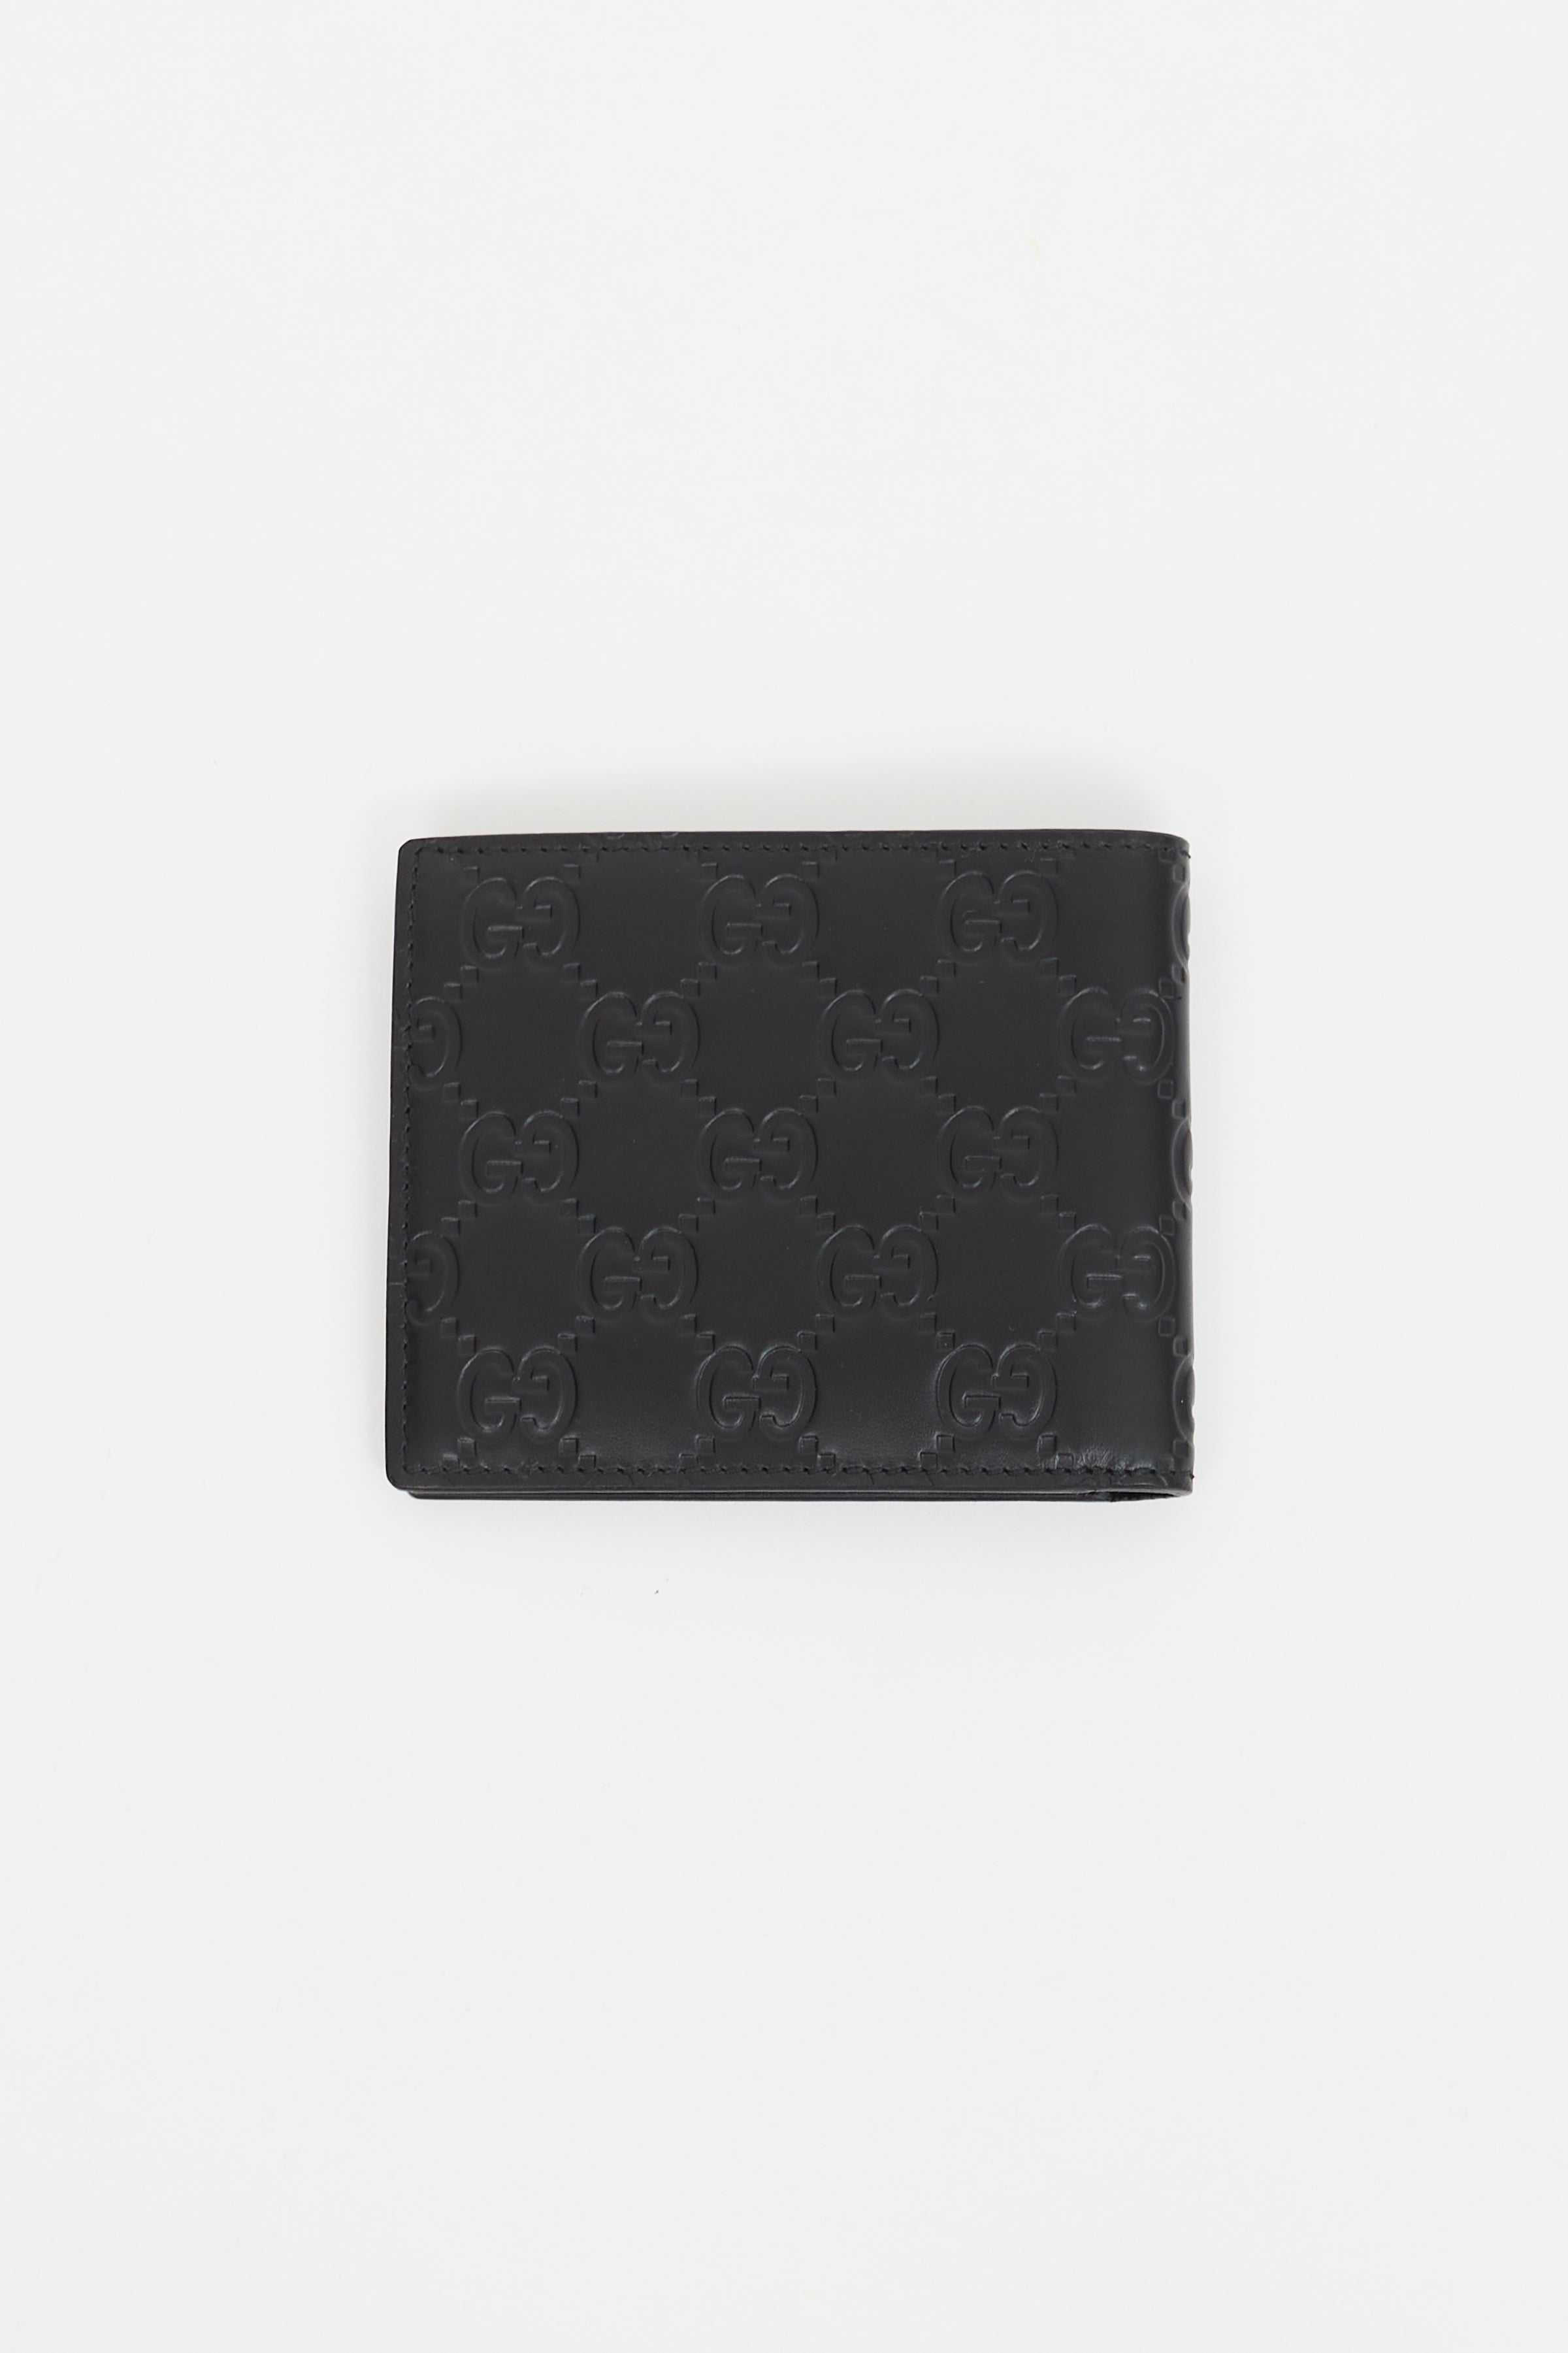 Gucci - Authenticated Wallet - Leather Black for Women, Never Worn